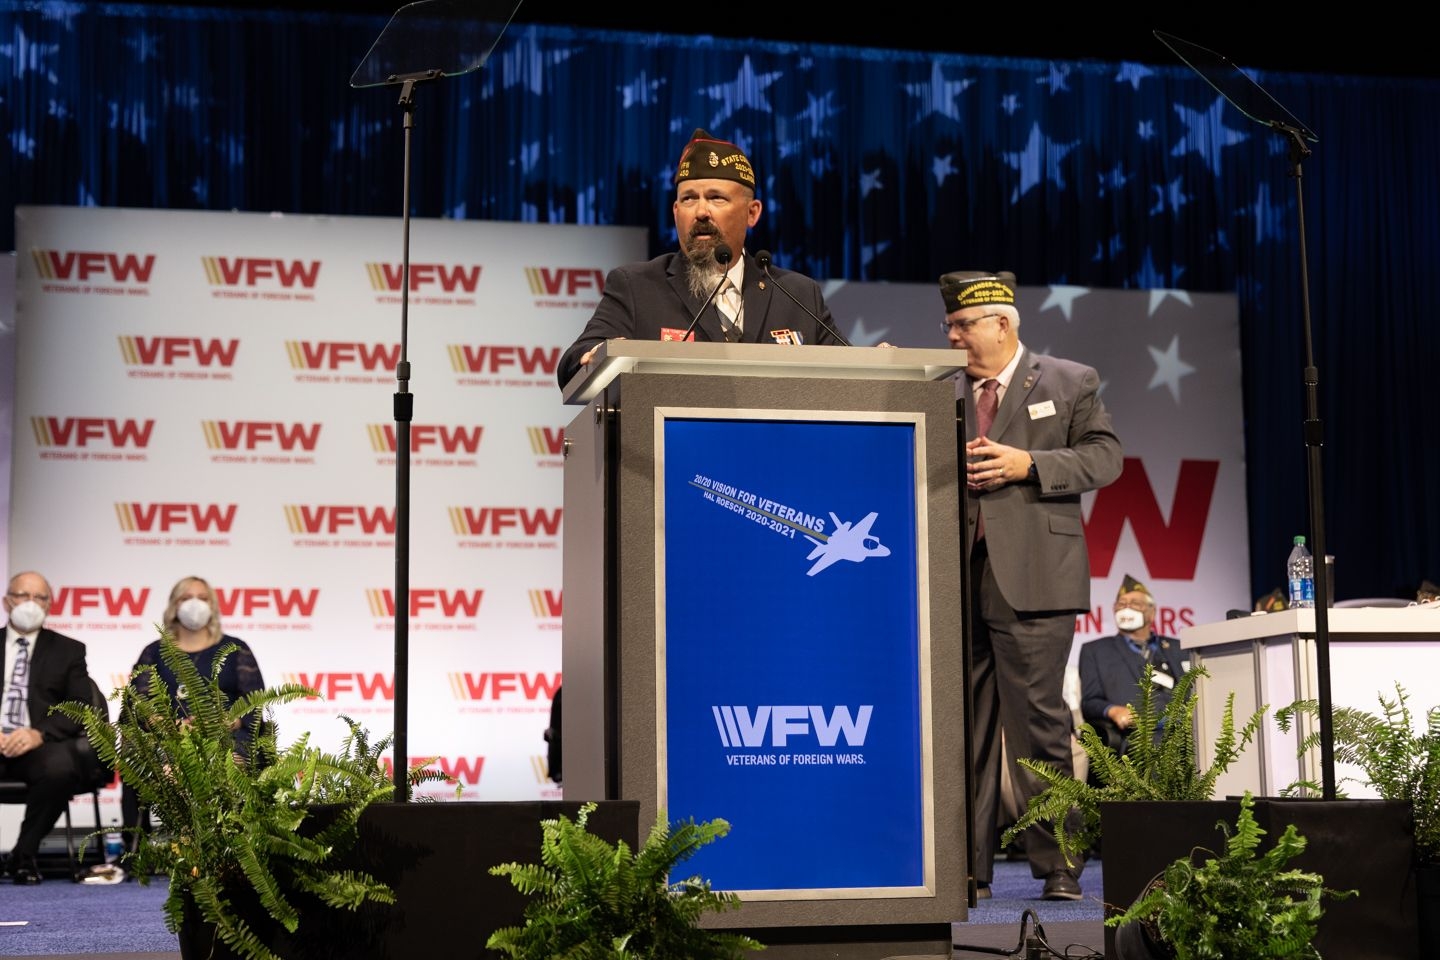 Veterans of Foreign Wars National Convention 30 July 3 August 2021 Kansas City Missouri. VFW Department of Illinois Commander Bobby Welch nominates Fritz Mihelcic for the high office of VFW Commander in Chief